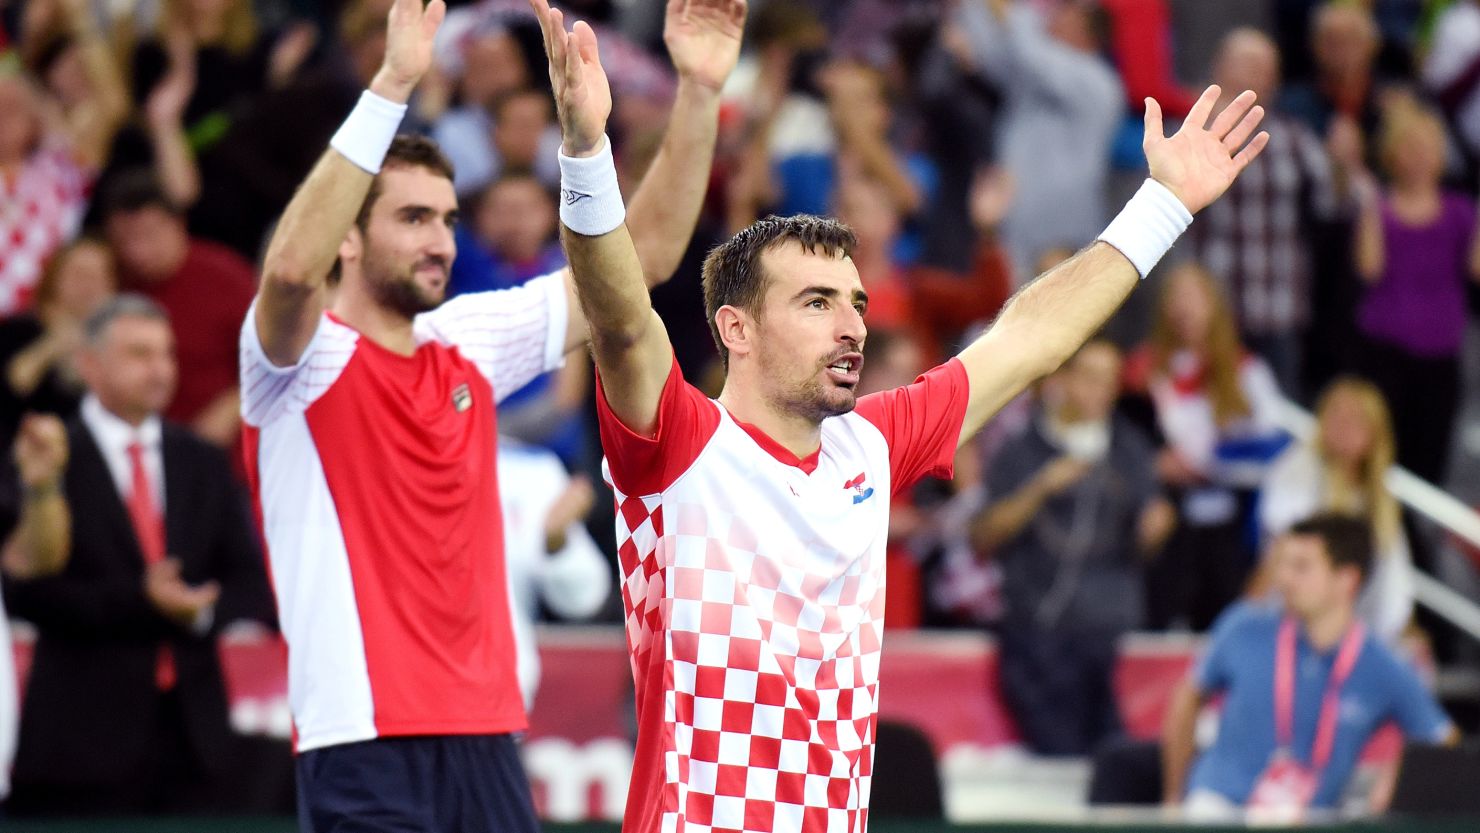 Croatia's tennis players Ivan Dodig (center) and Marin Cilic celebrate their doubles victory in the Davis Cup final.